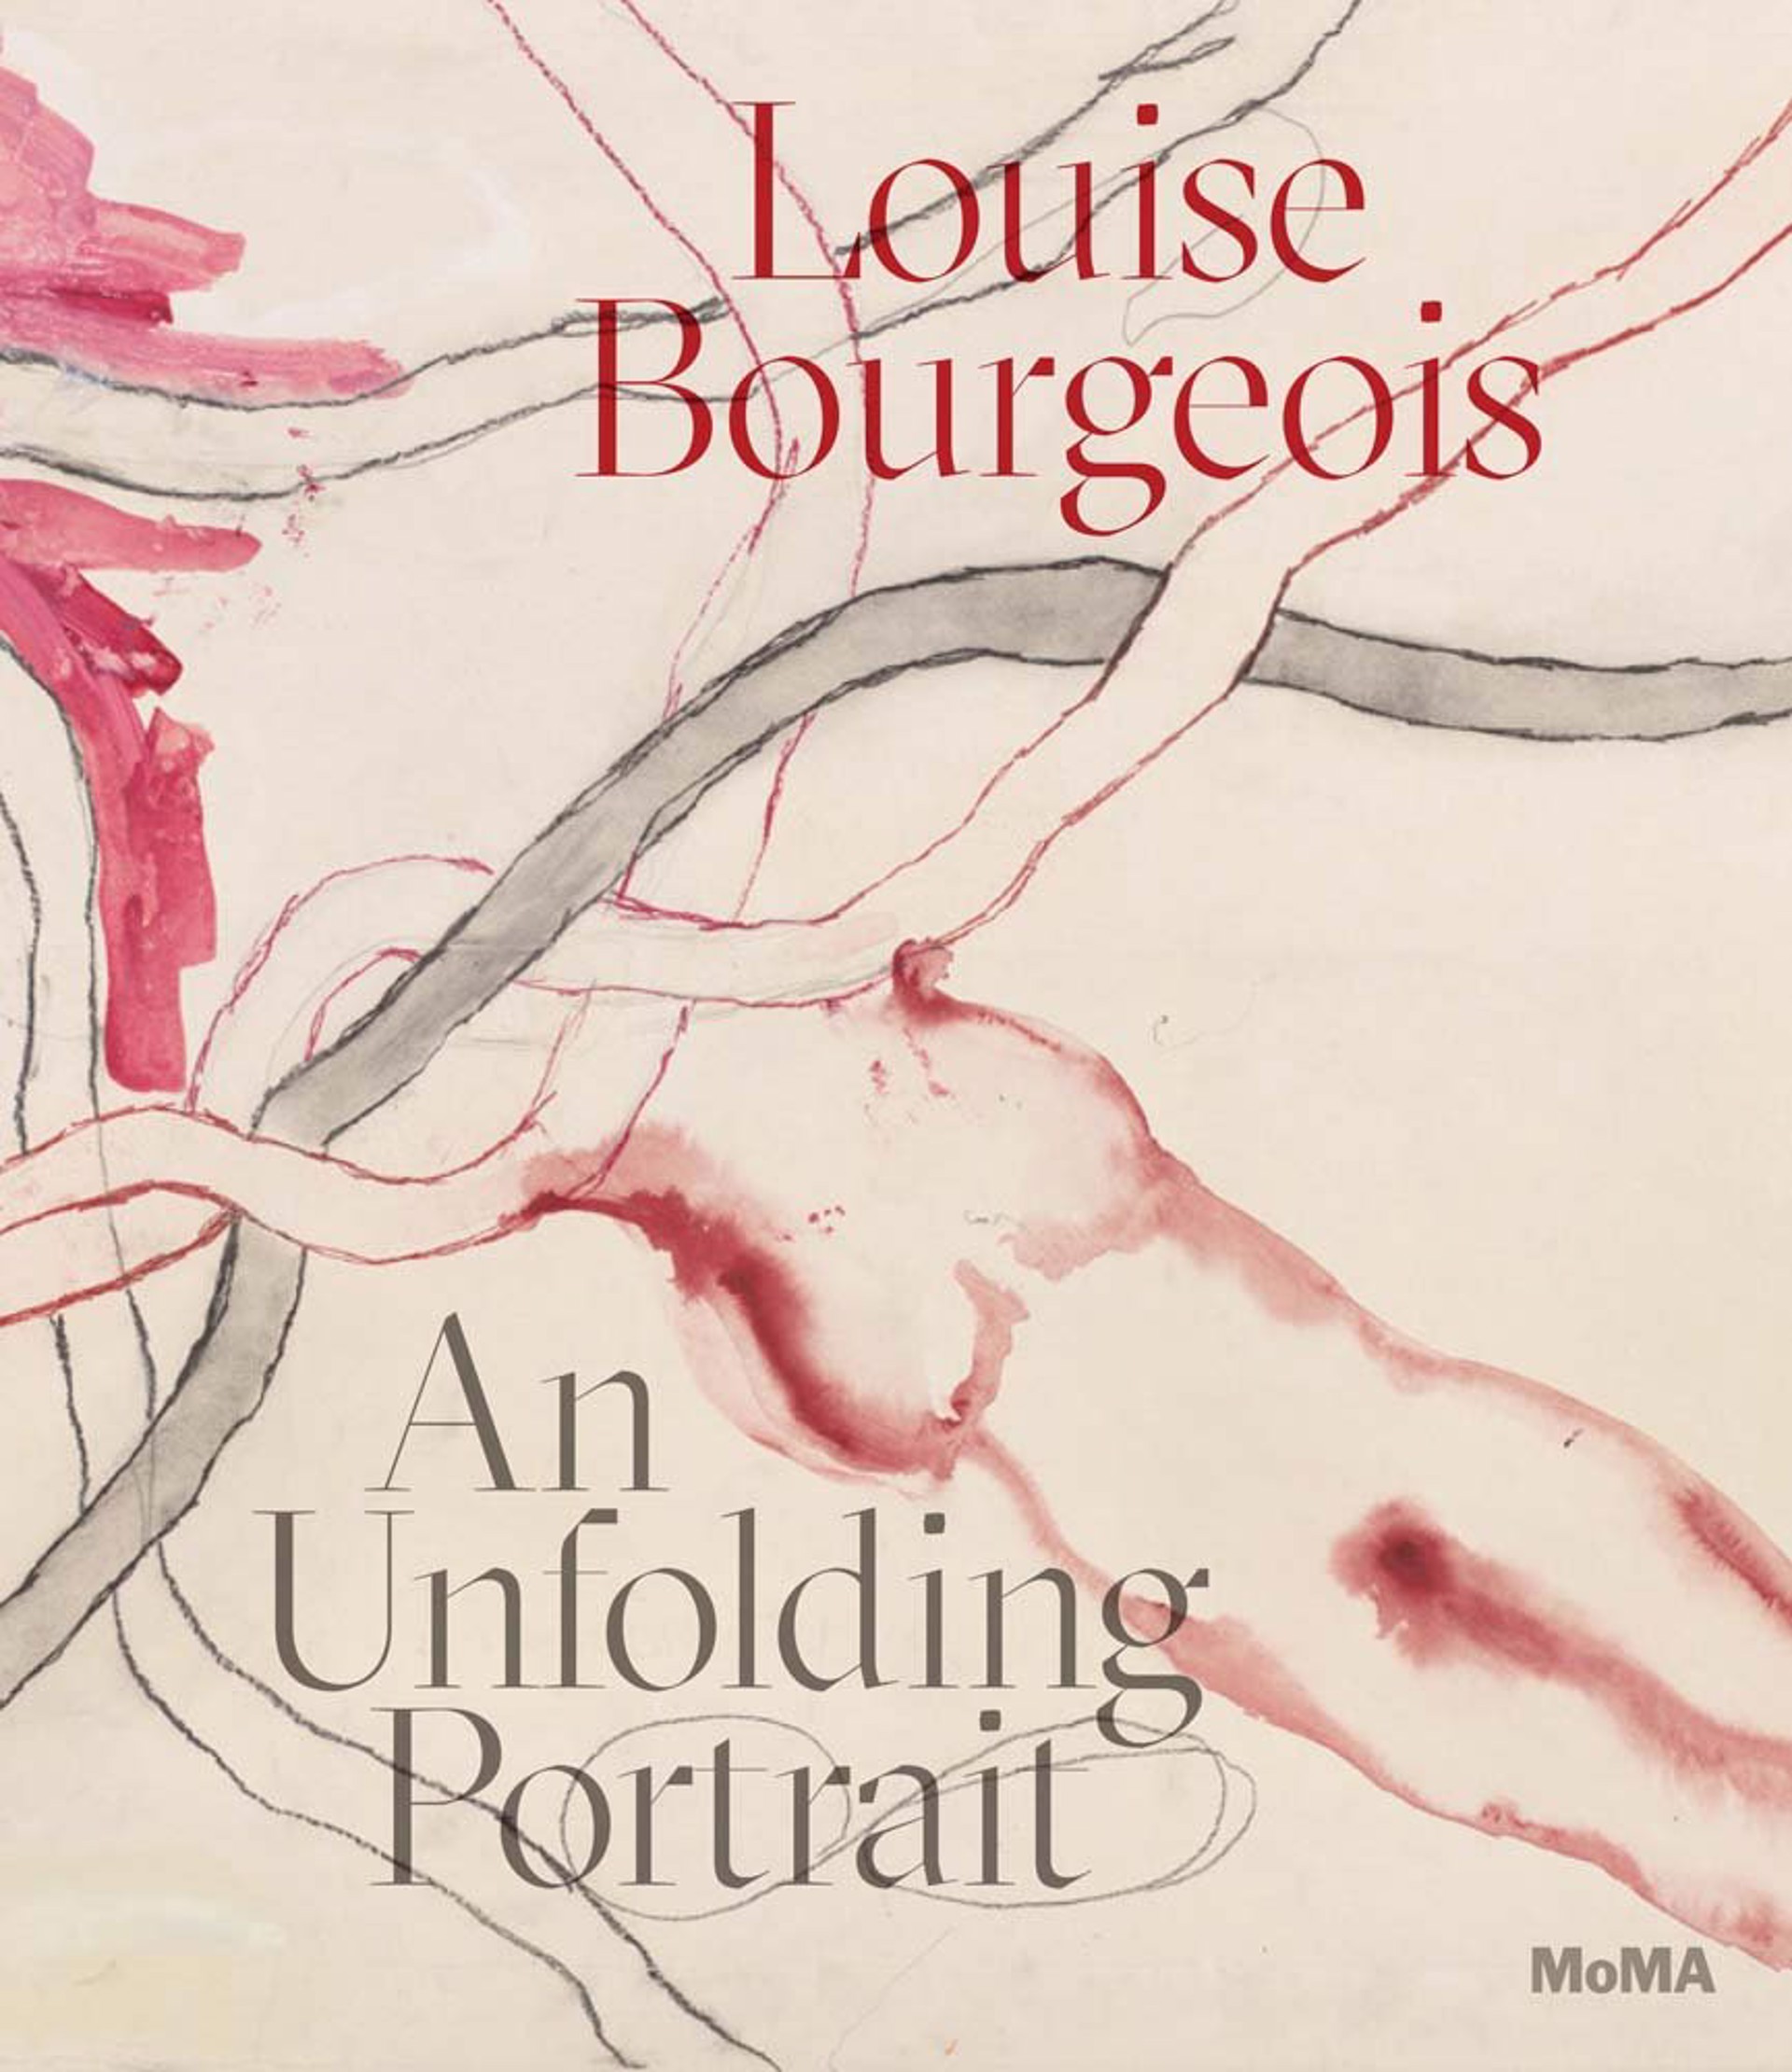 Louise Bourgeois: An Unfolding Portrait by Louise Bourgeois